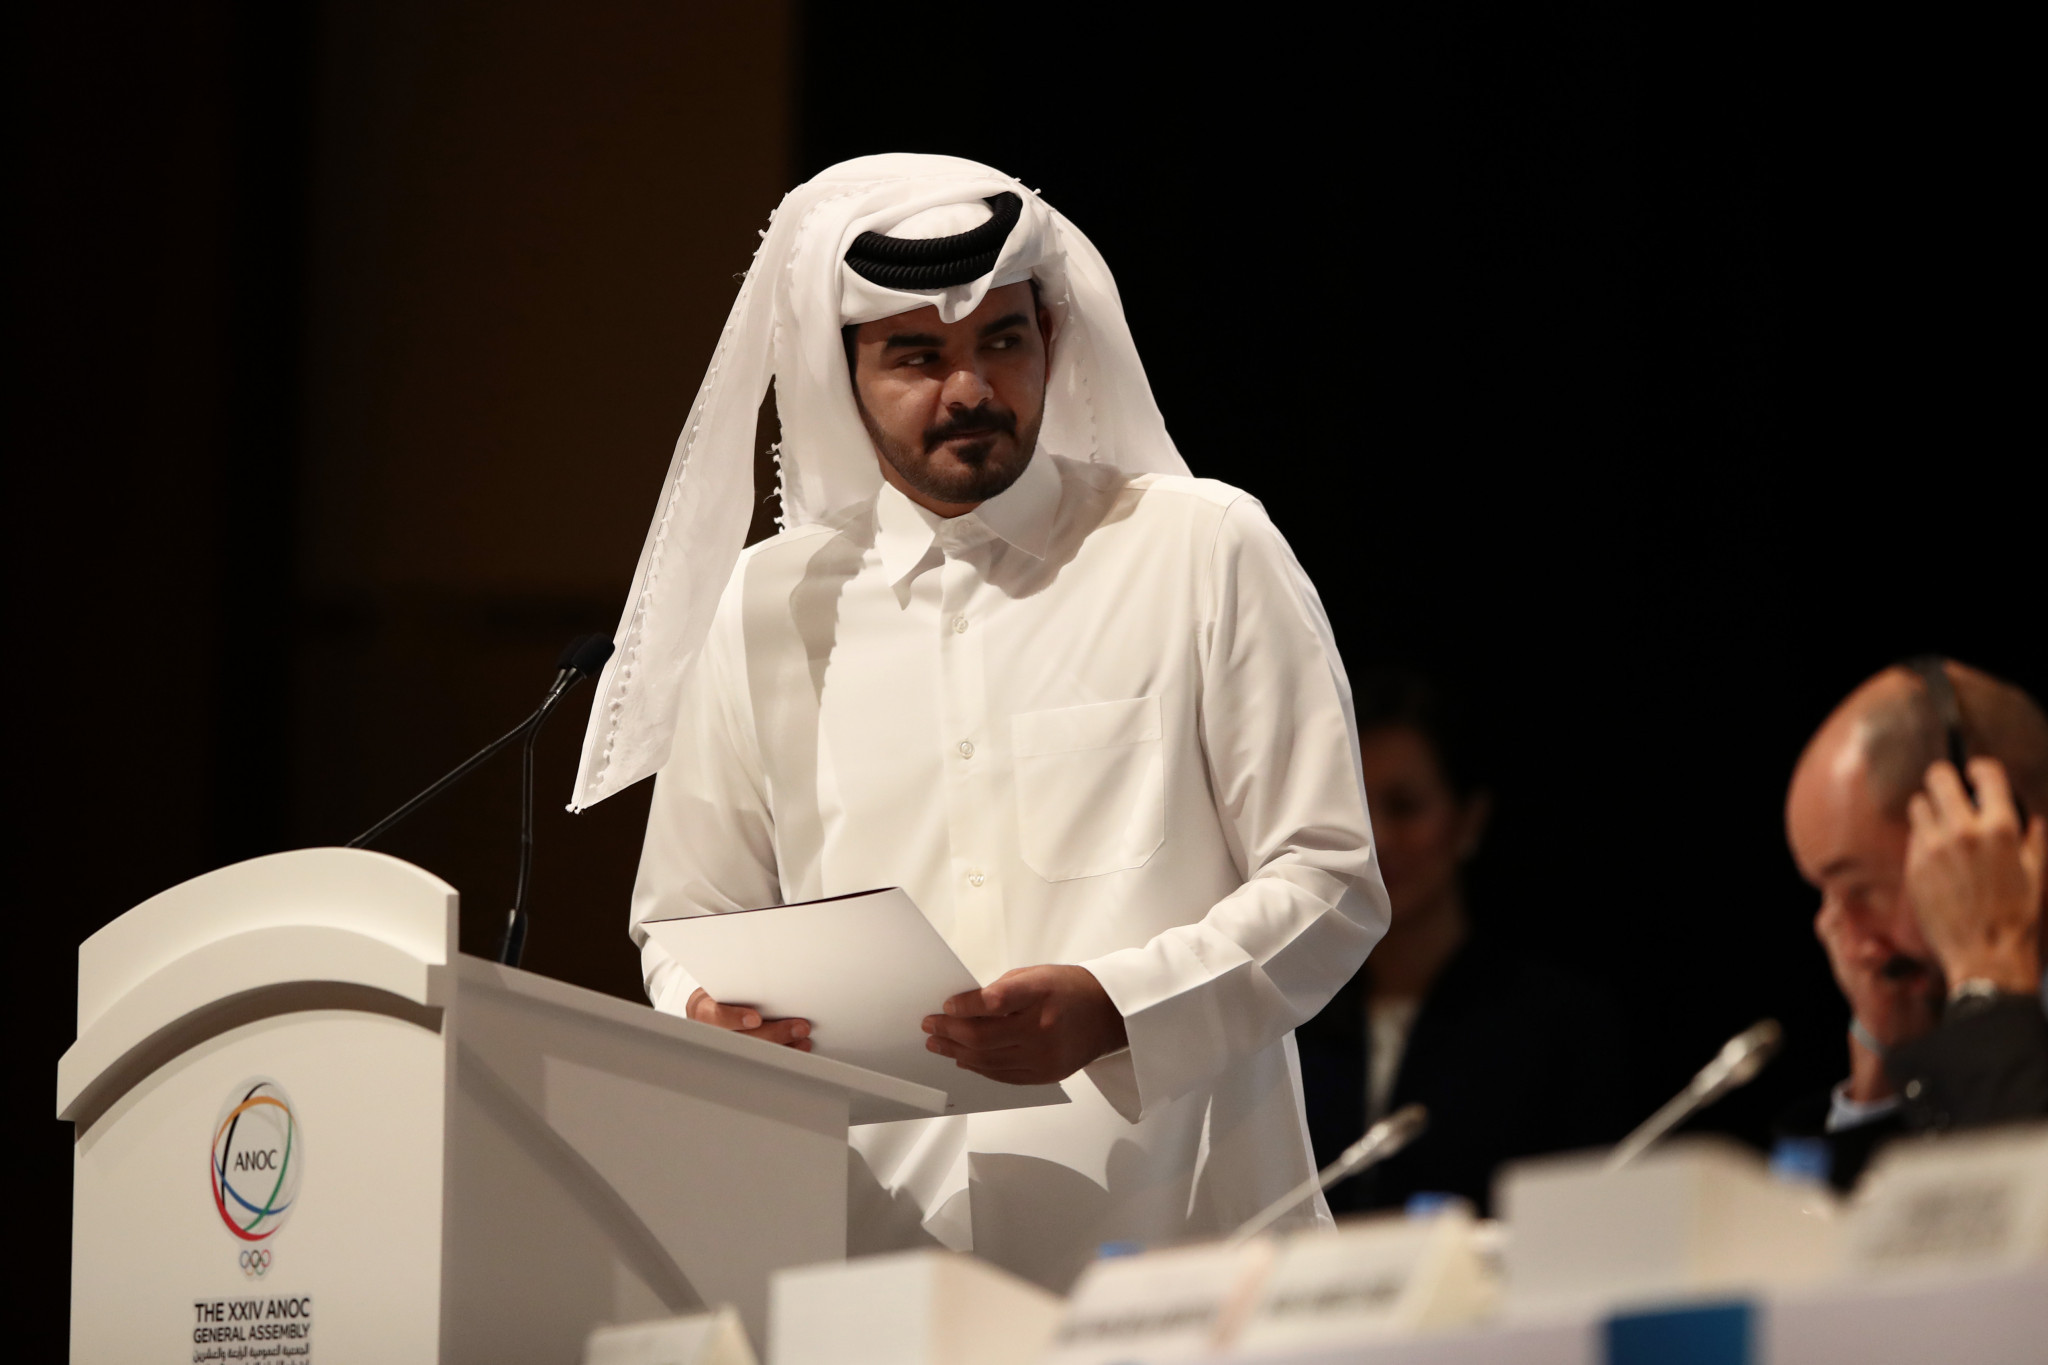 QOC President Sheikh Joaan bin Hamad Al-Thani said his organisation wanted to repay Olympics organisers ahead of Tokyo 2020 ©Getty Images